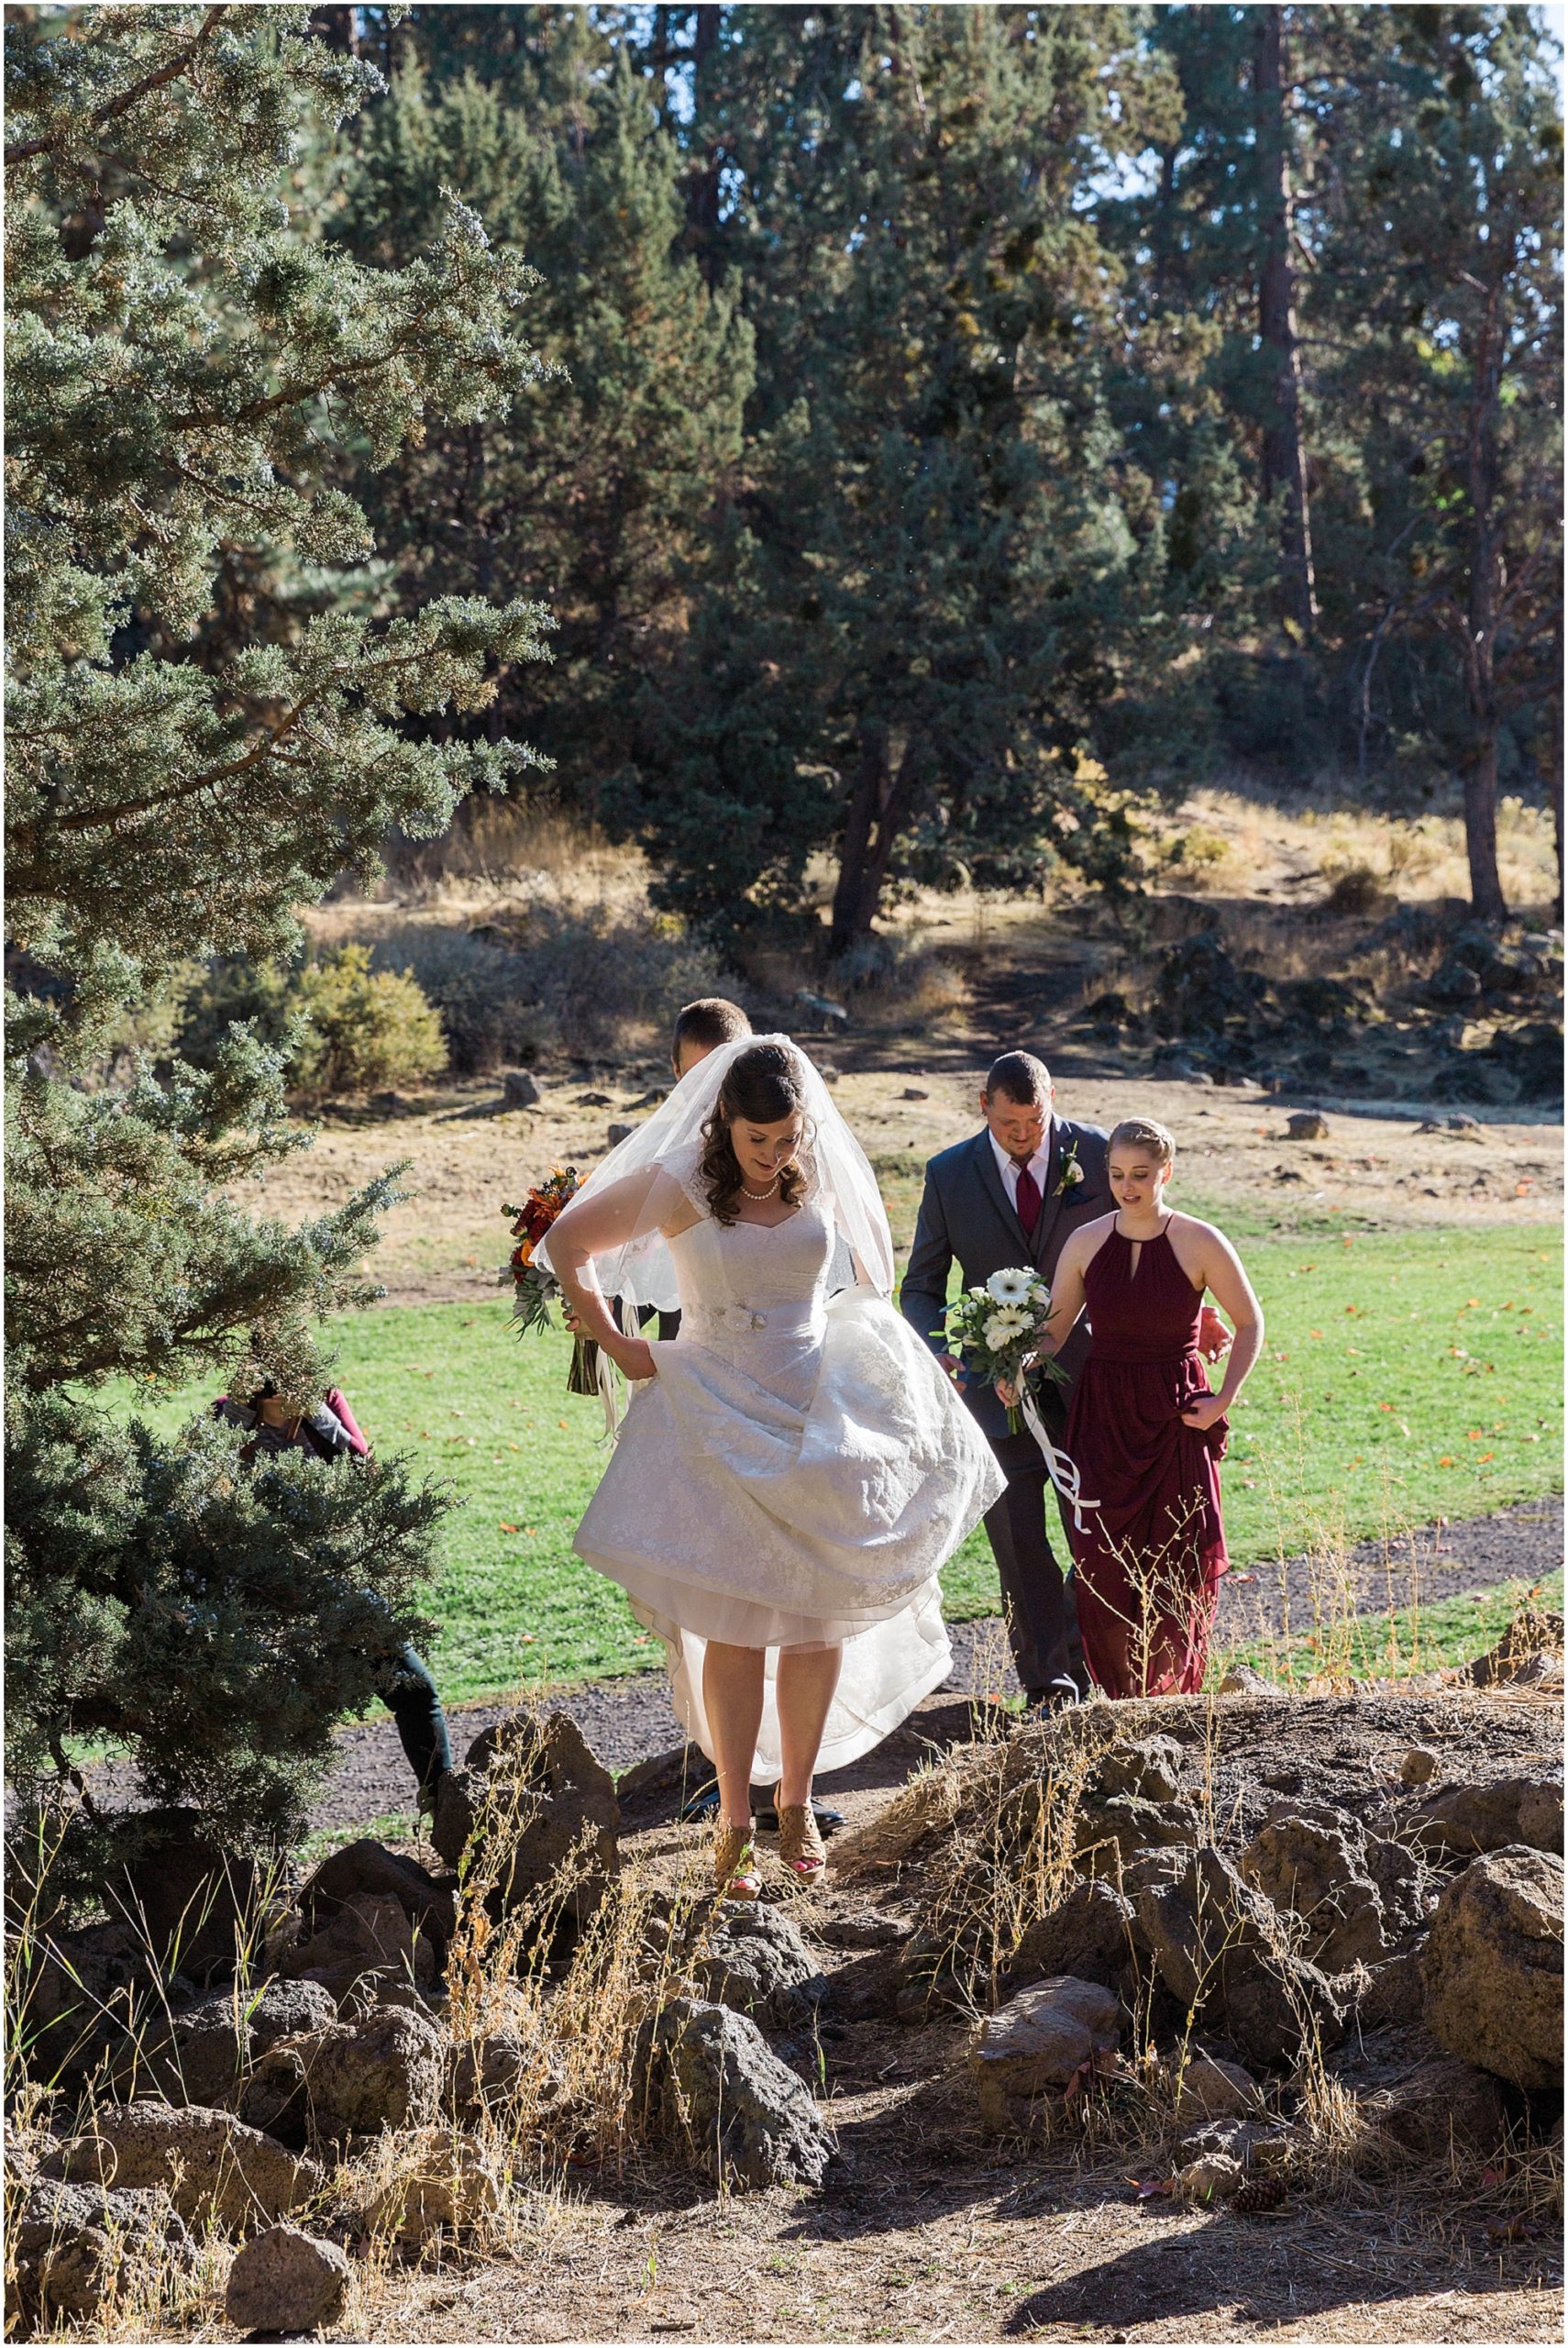 The bride hikes up her dress and walks through the lava rock at her Hollinshead Barn fall wedding in Bend, OR. | Erica Swantek Photography